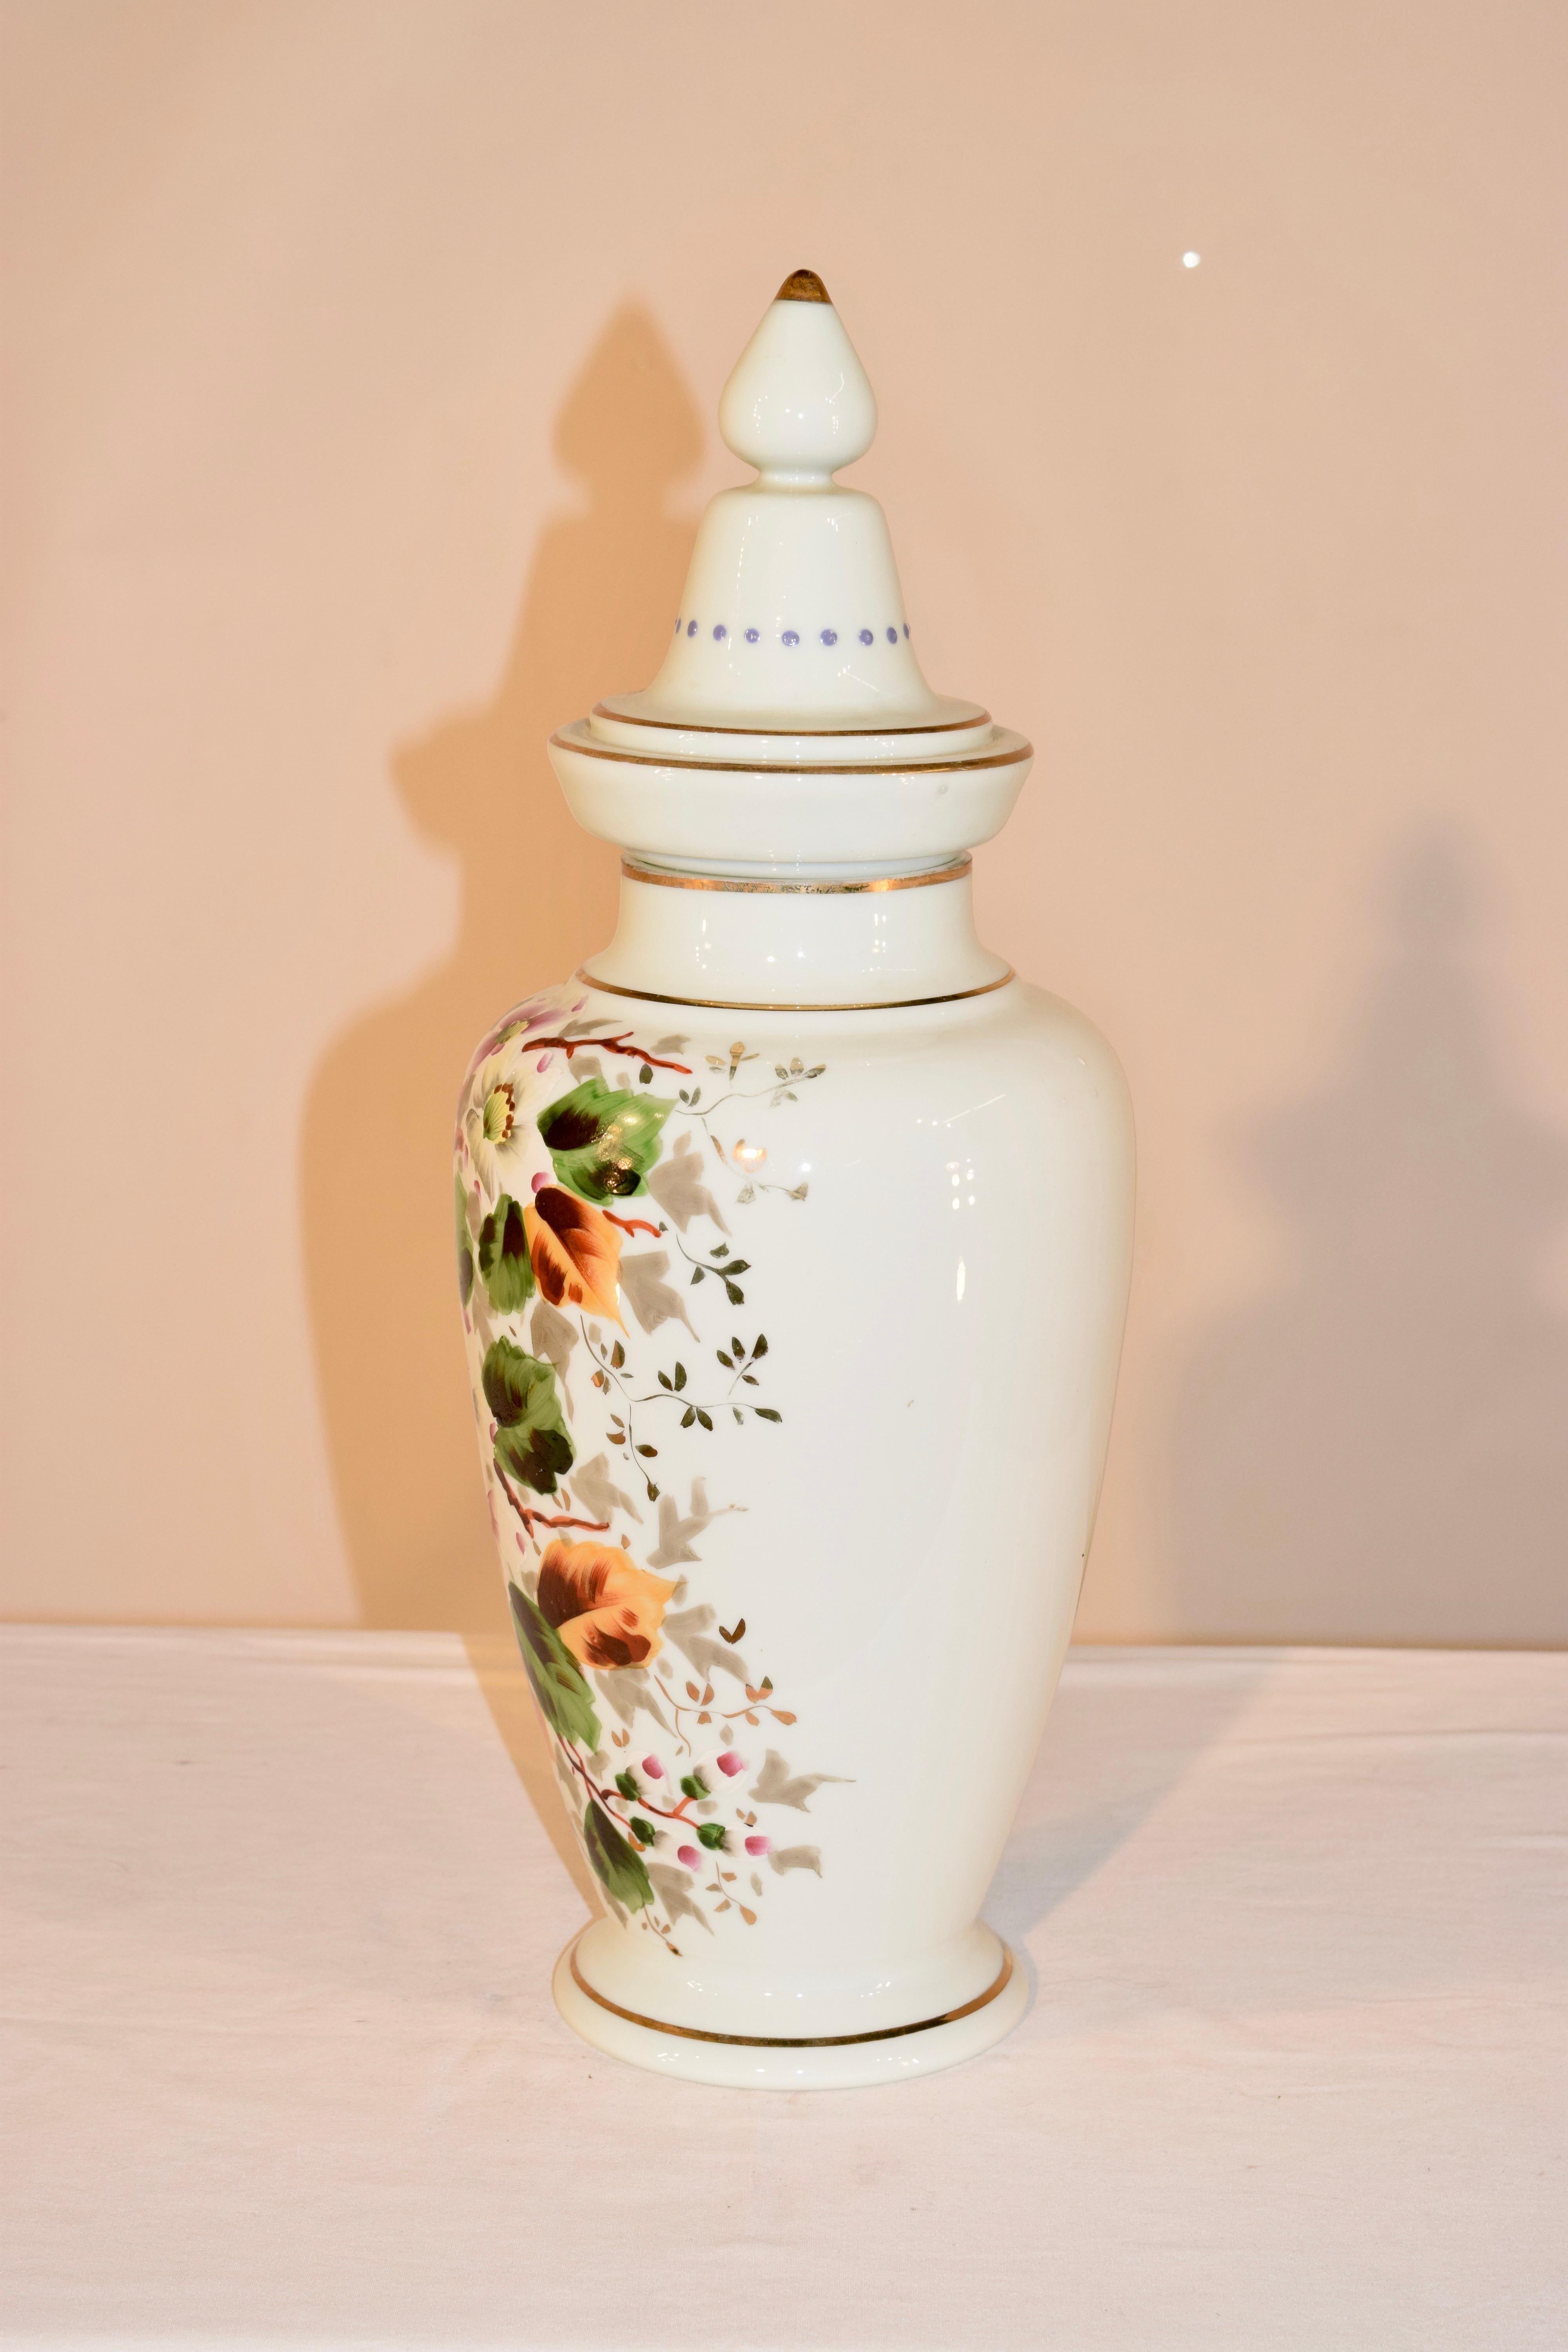 Late 19th century opaline glass lidded urn from France with wonderfully hand painted florals and vines.